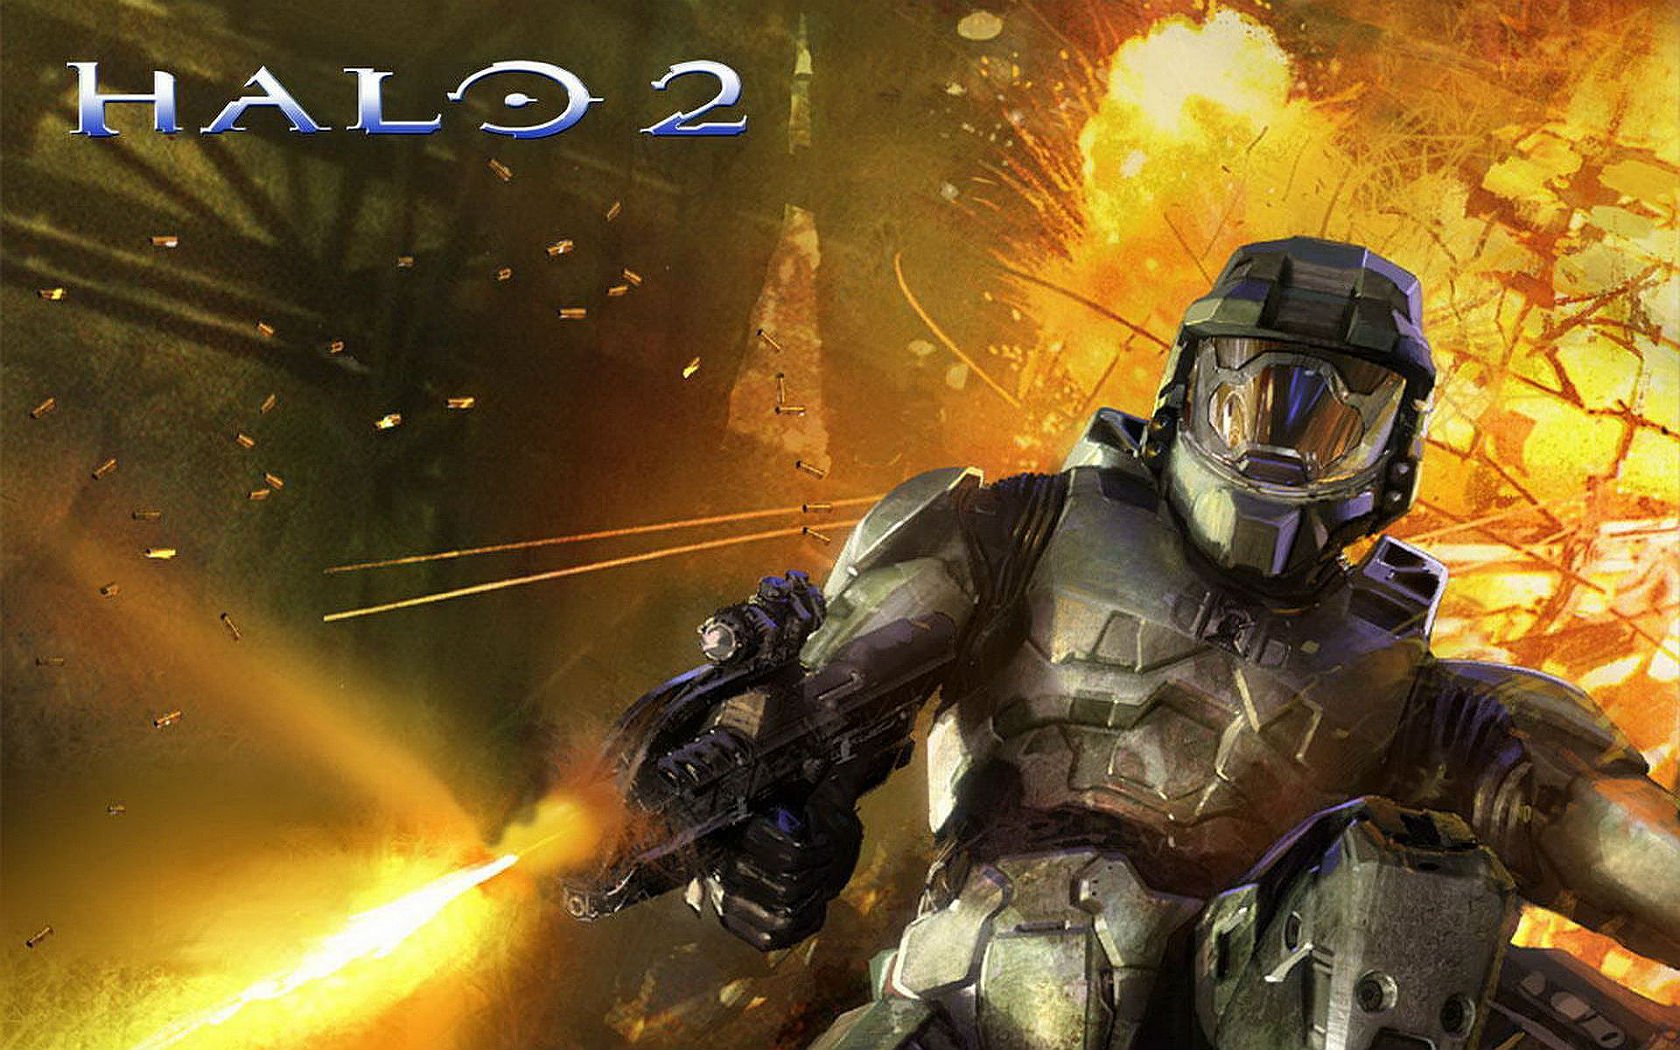 halo, Shooter, Fps, Action, Fighting, Warrior, Sci fi, Futuristic, Armor, Cyborg, Robot, Poster Wallpaper